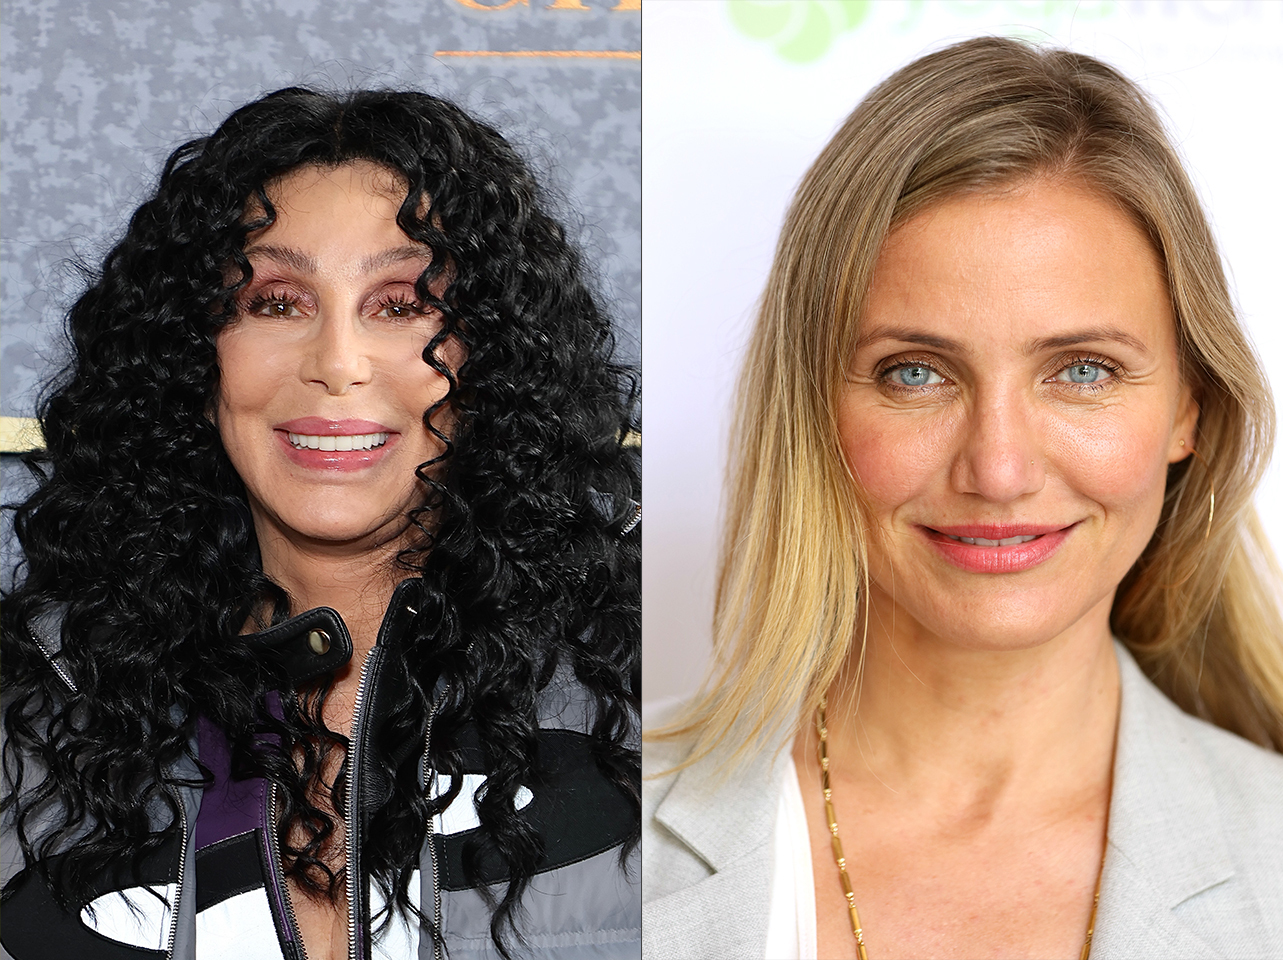 Cher and Cameron Diaz | Source: Getty Images